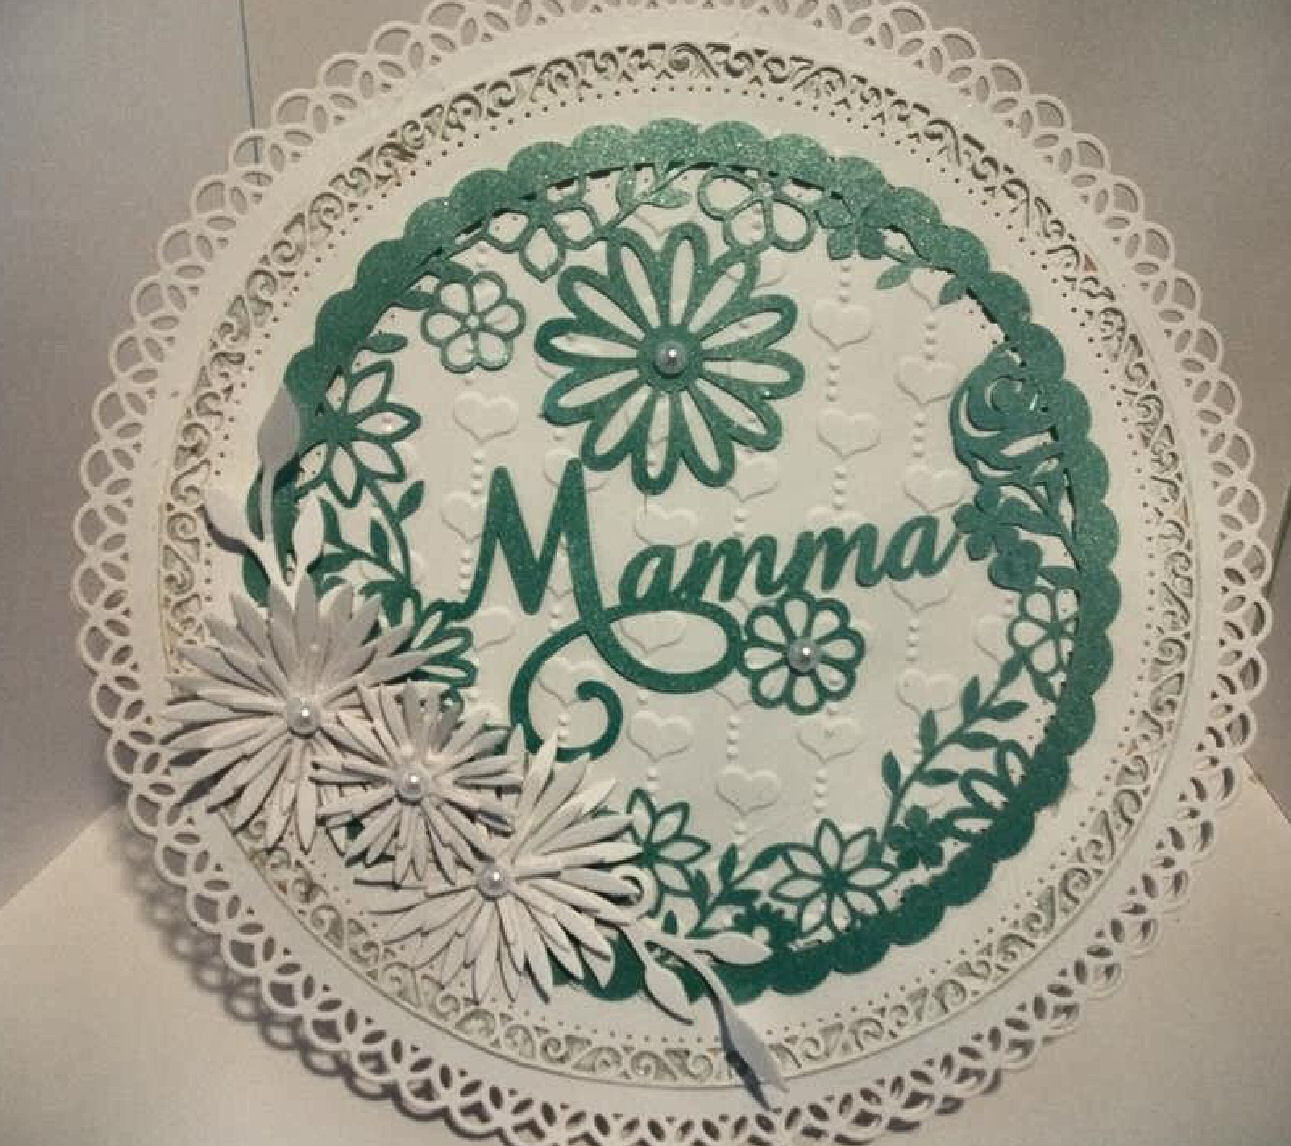 Mamma decorative round framed ideal for Mother's Day.